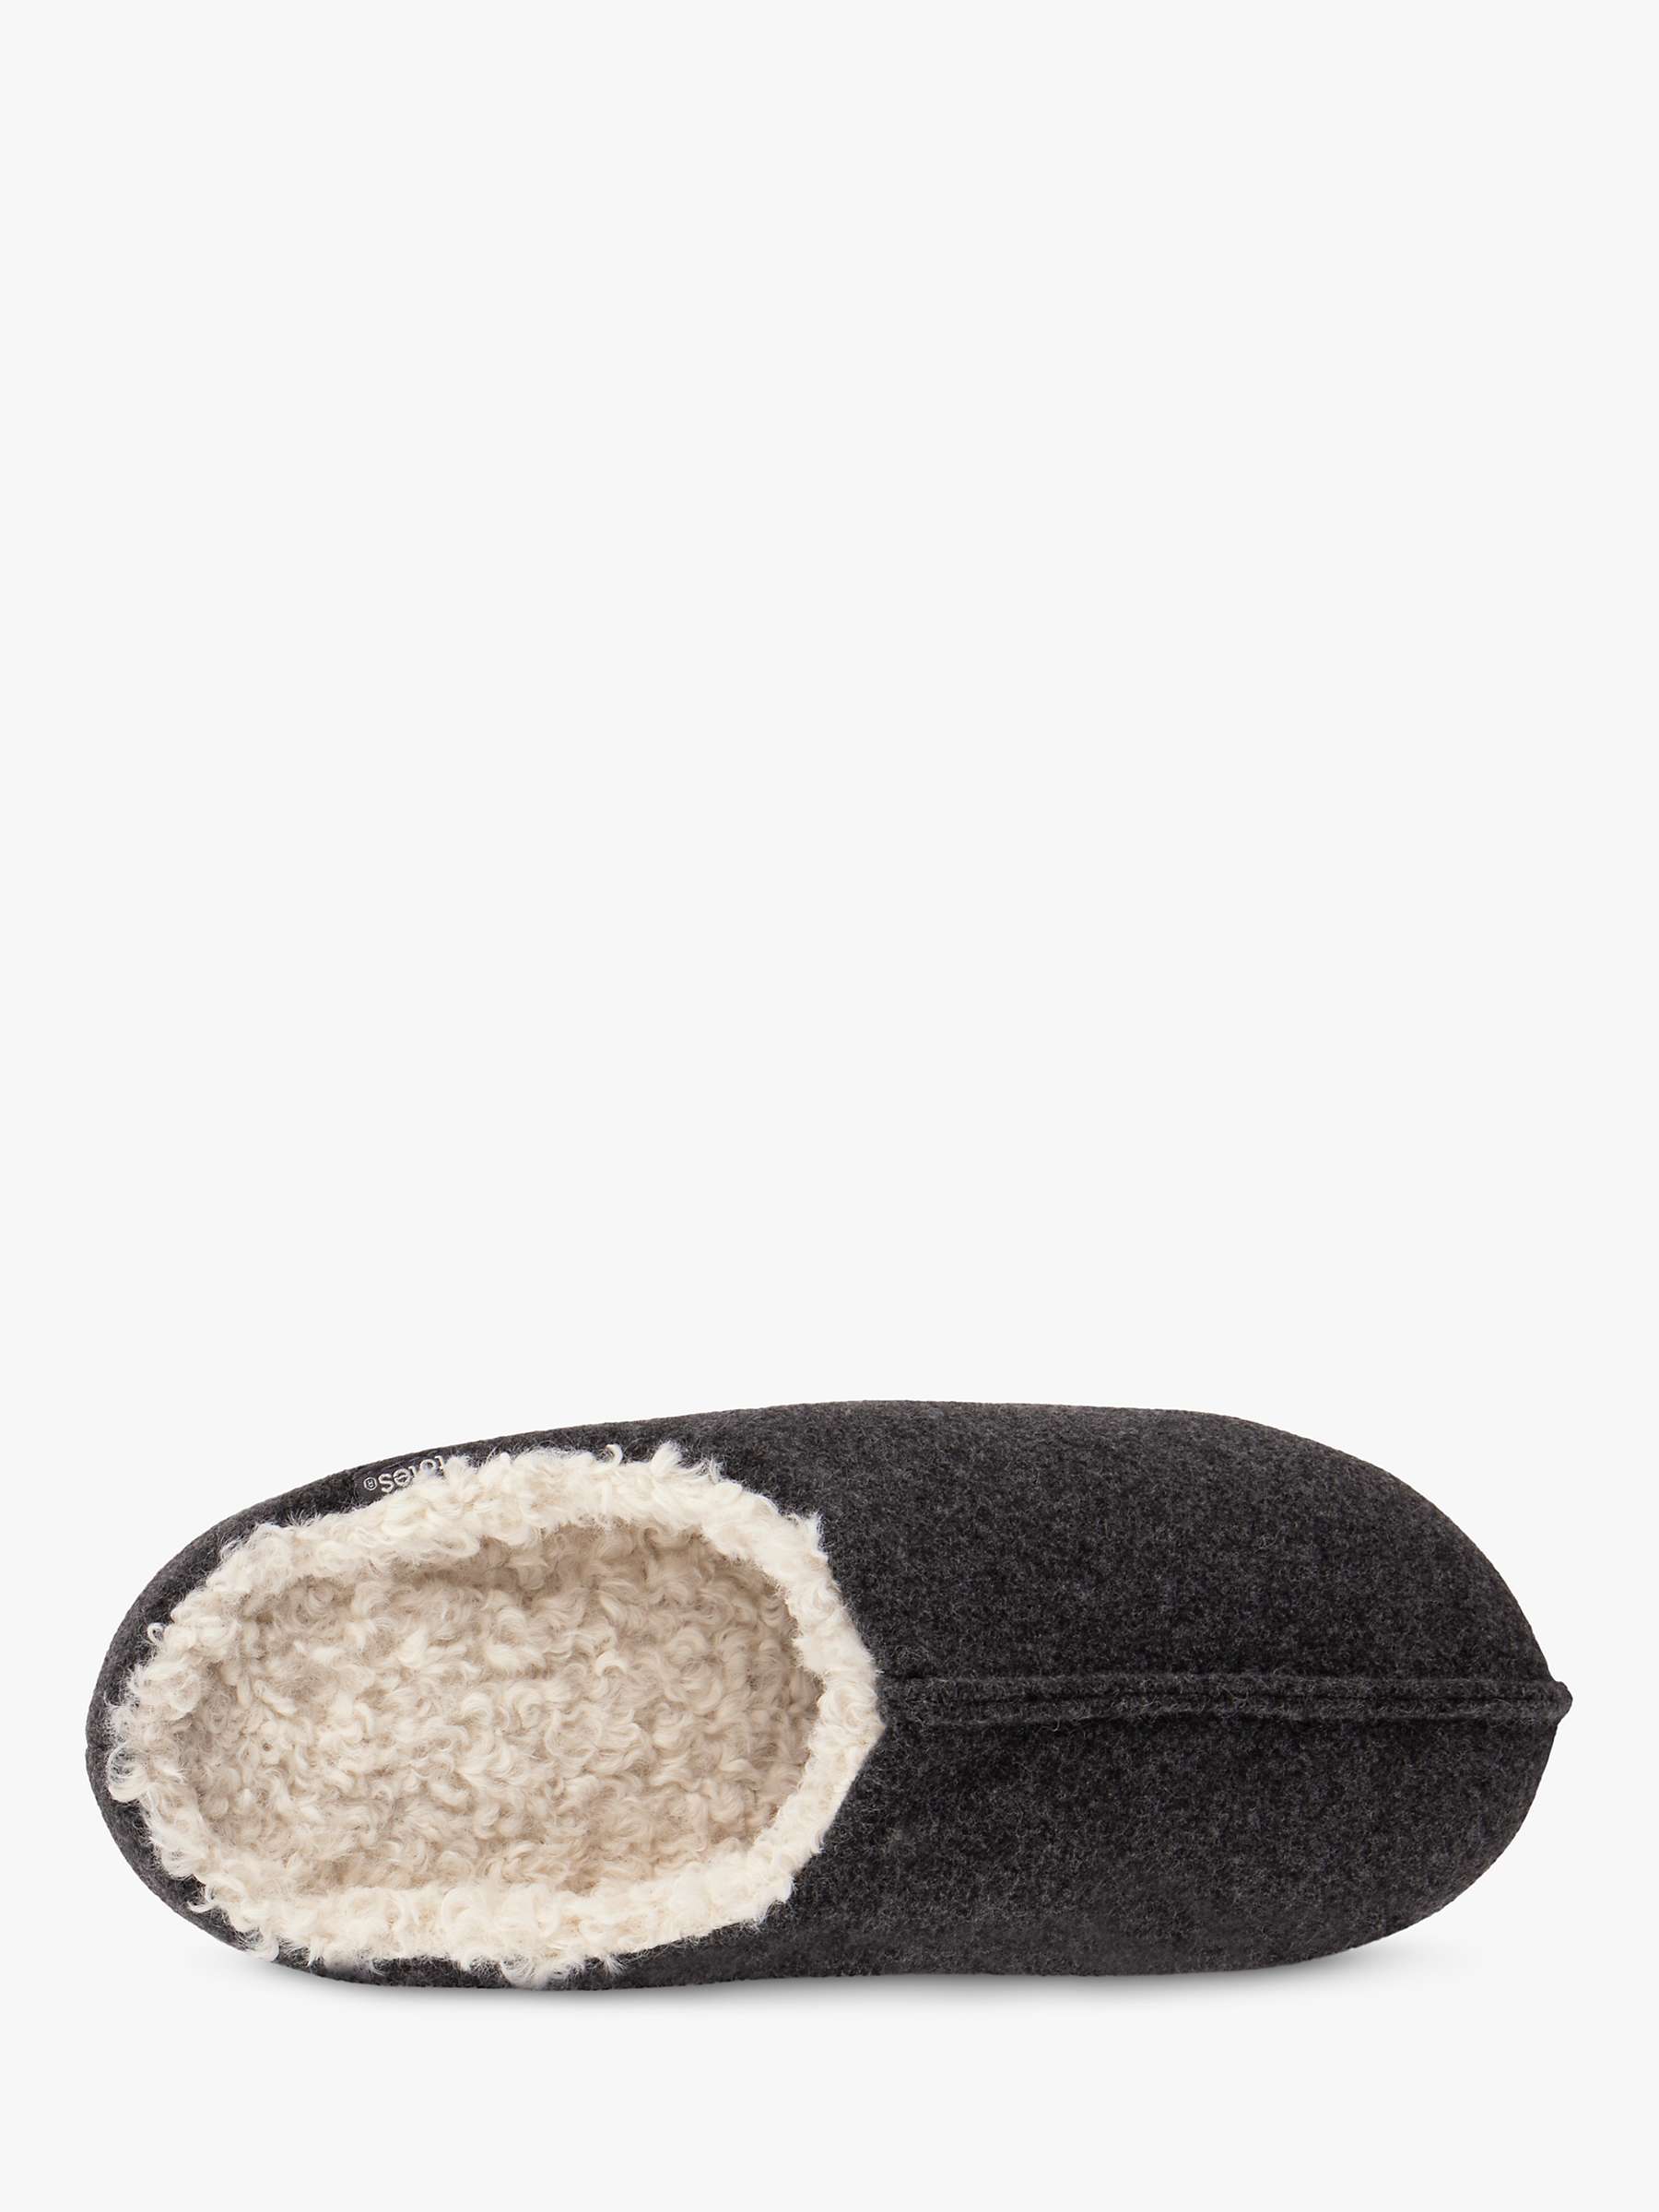 Buy totes ICONS Felted Centre Seam Mule Slippers, Charcoal Online at johnlewis.com